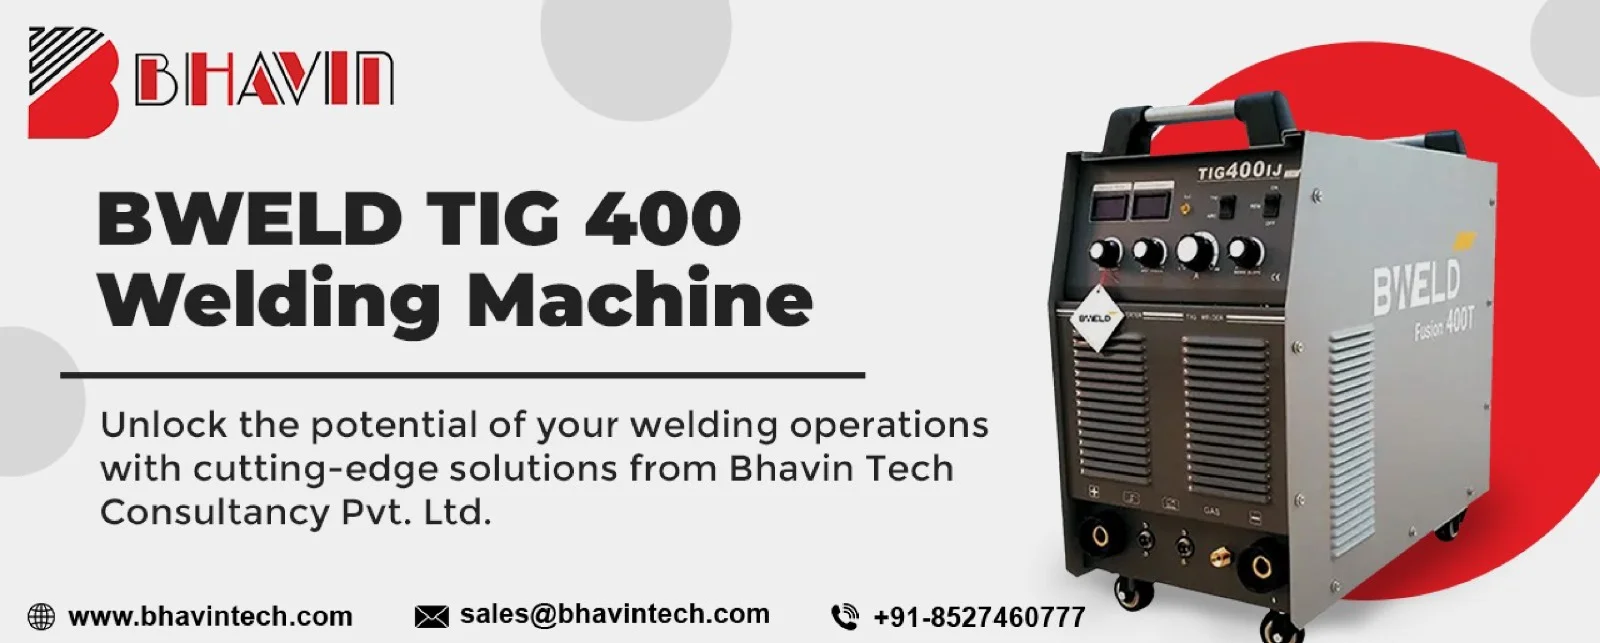 Welding Machines That Deliver Excellence